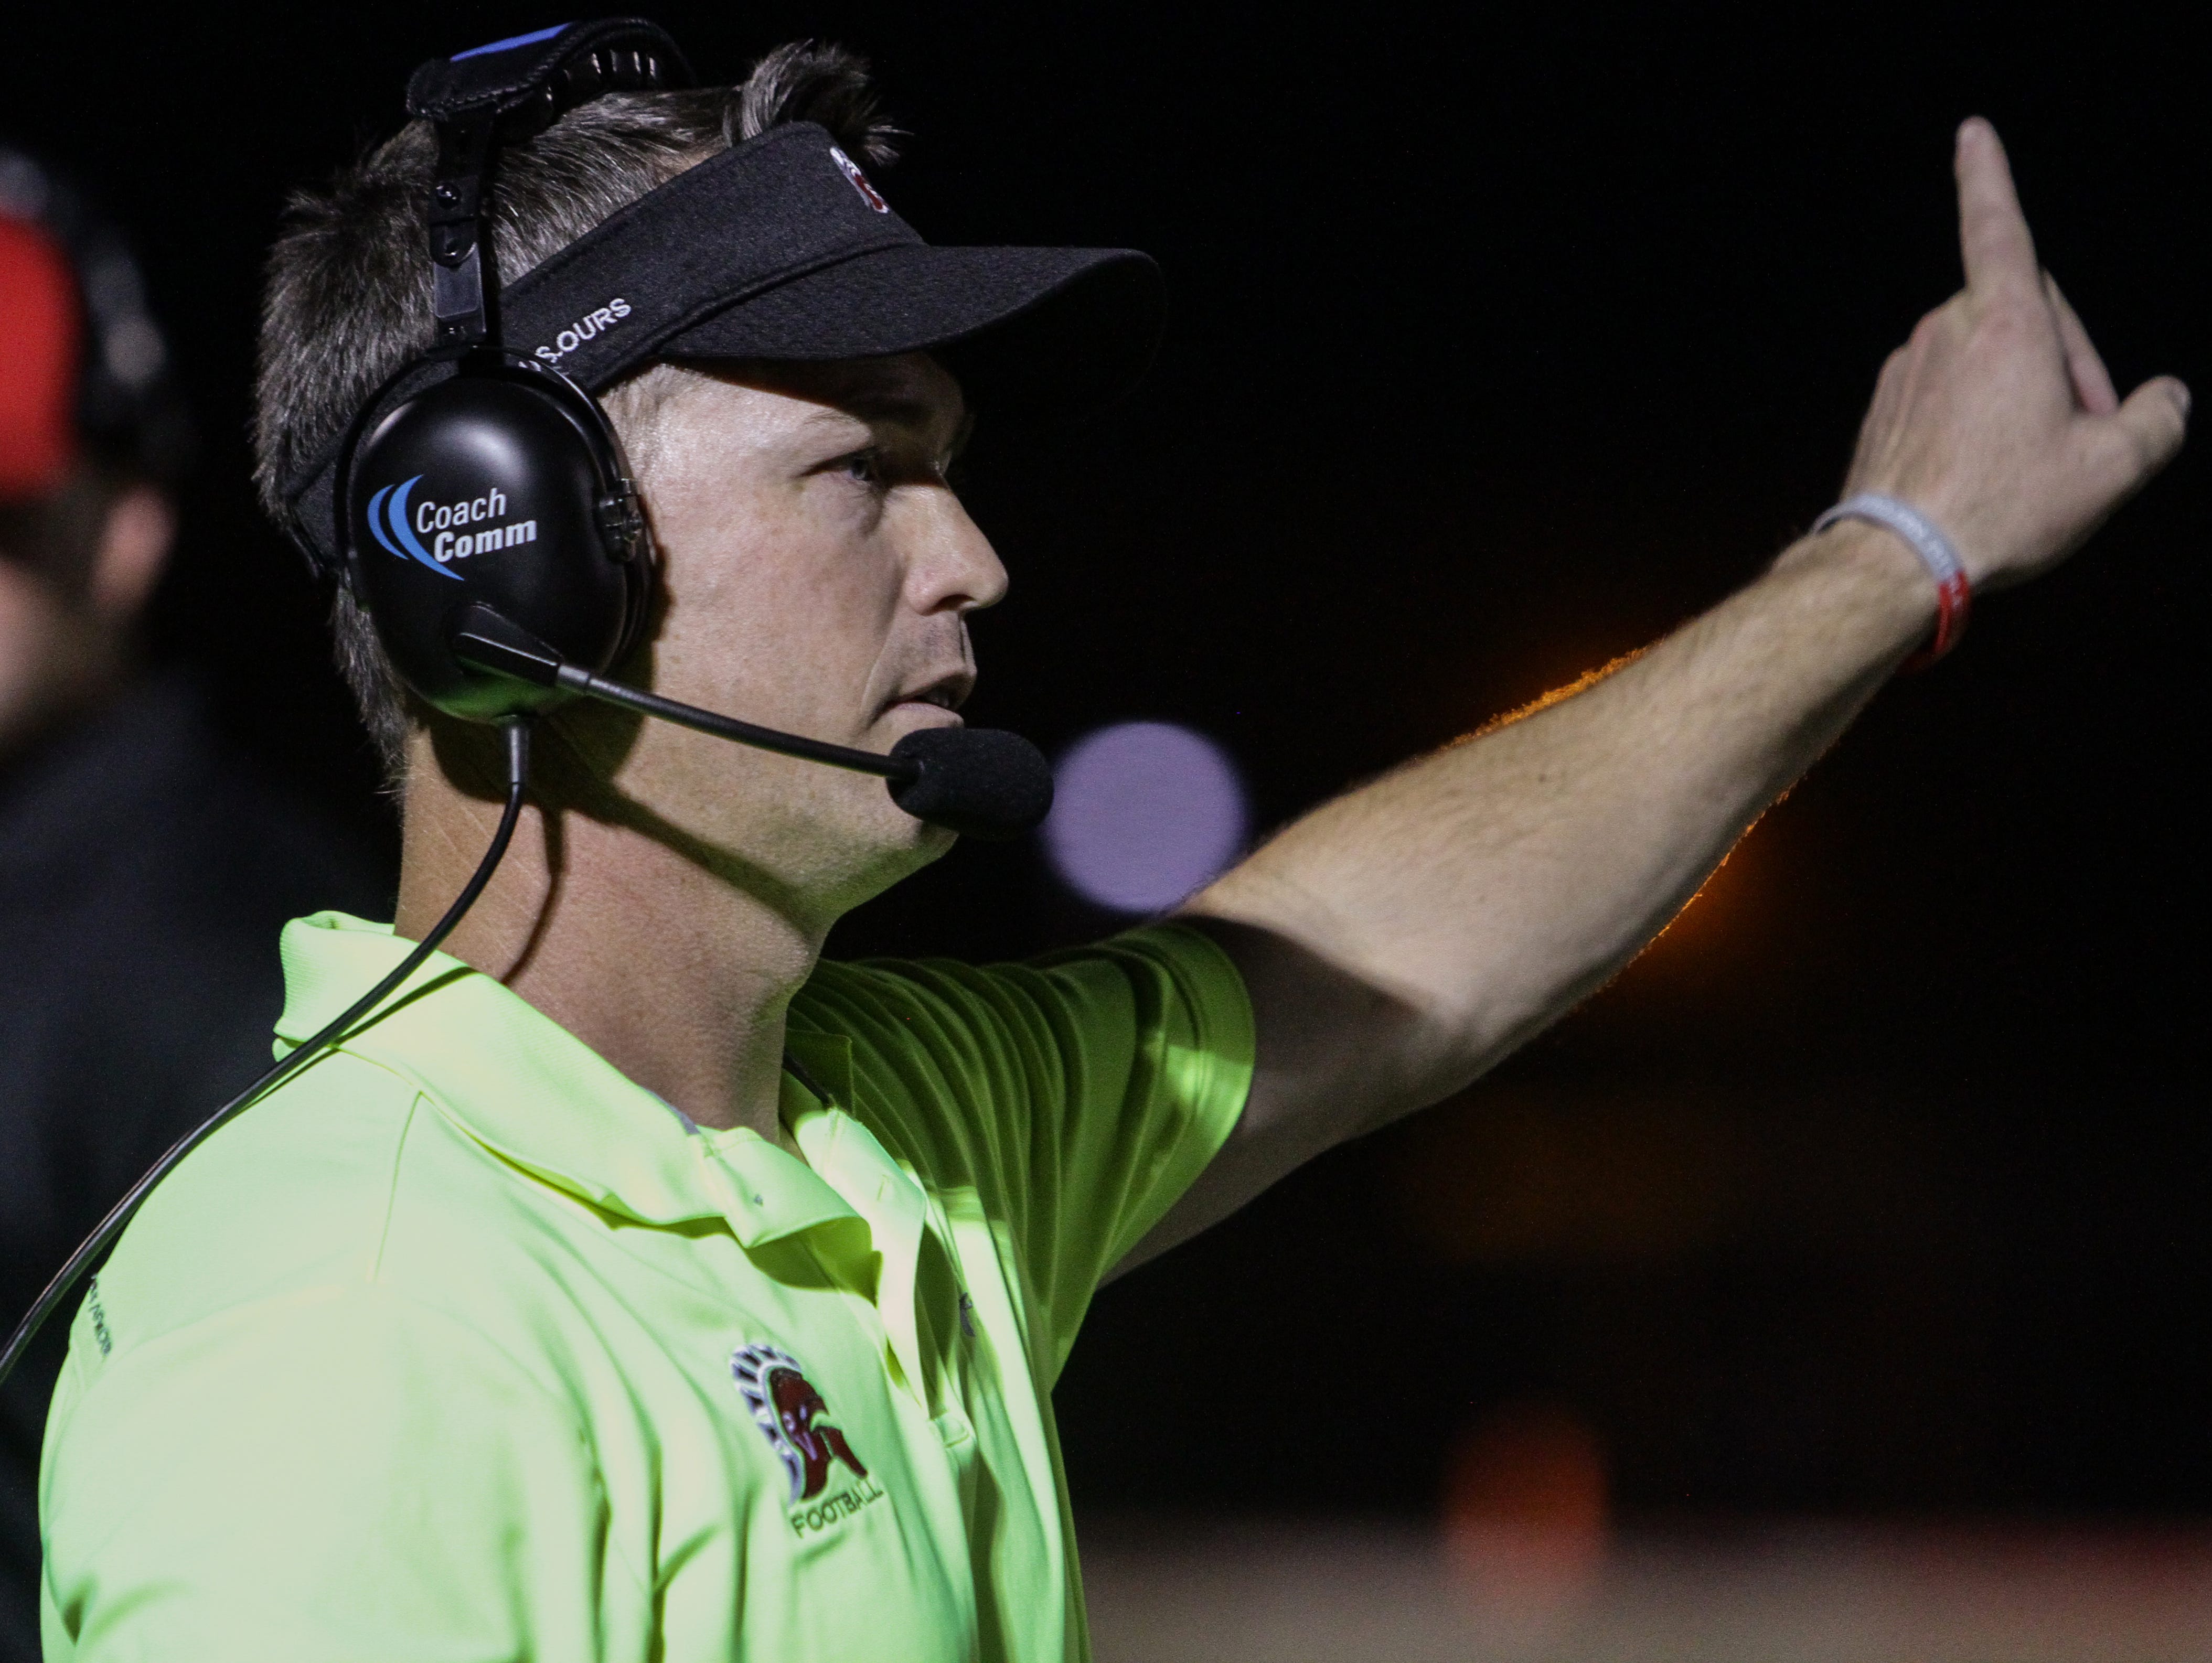 Paradise Valley head coach Greg Davis signals to his team against Sunnyslope on Friday, September 11, 2015 in Paradise Valley, AZ.